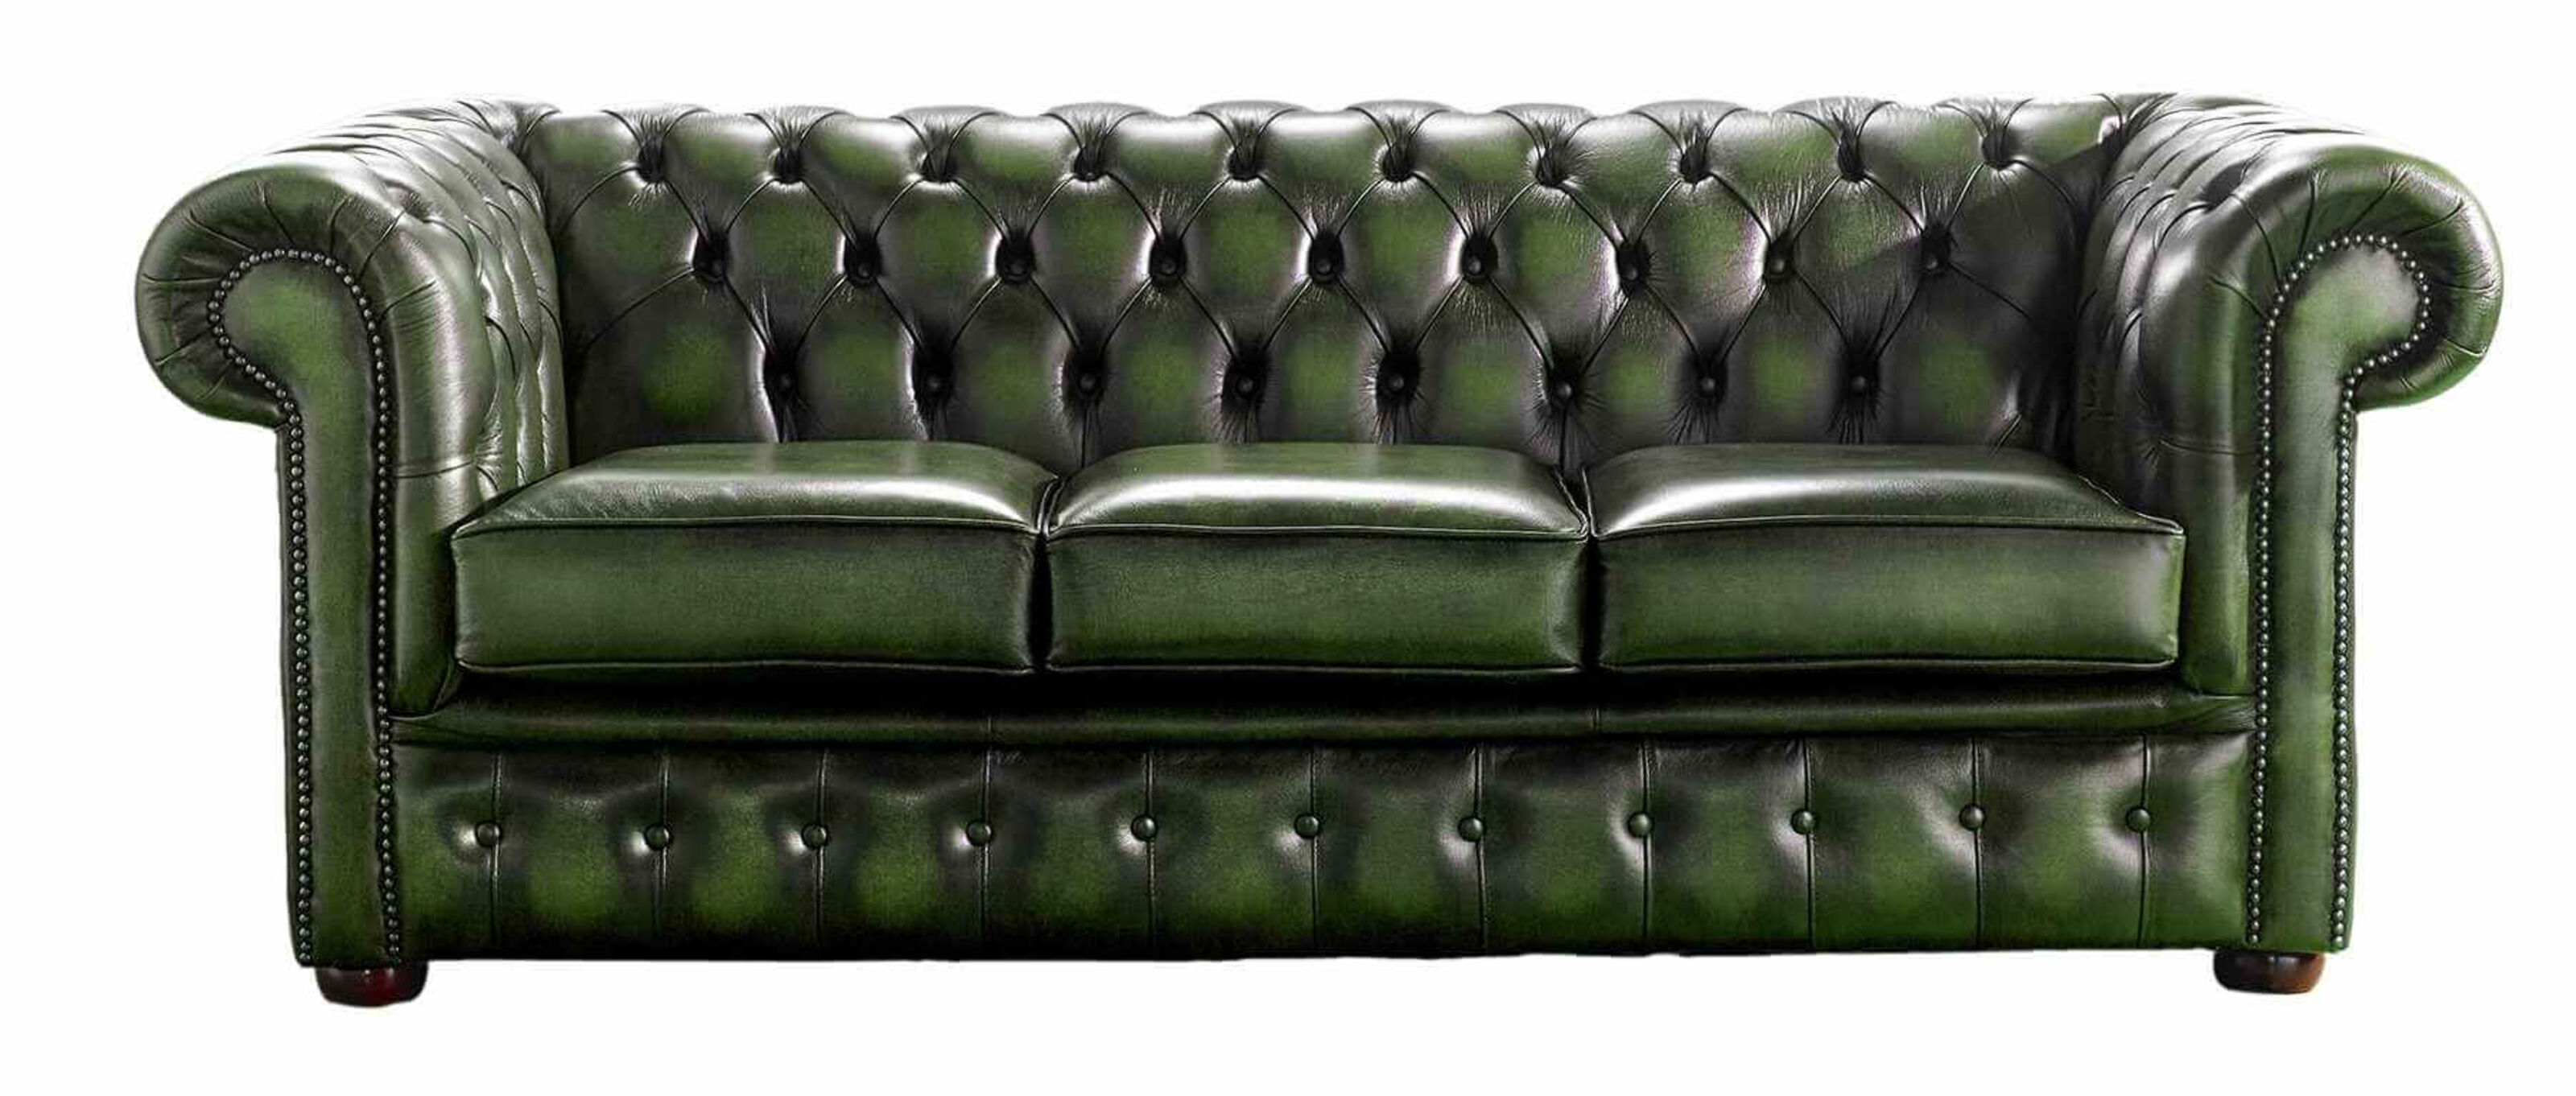 Chesterfield Sofas Born and Bred in the Heart of Tradition  %Post Title